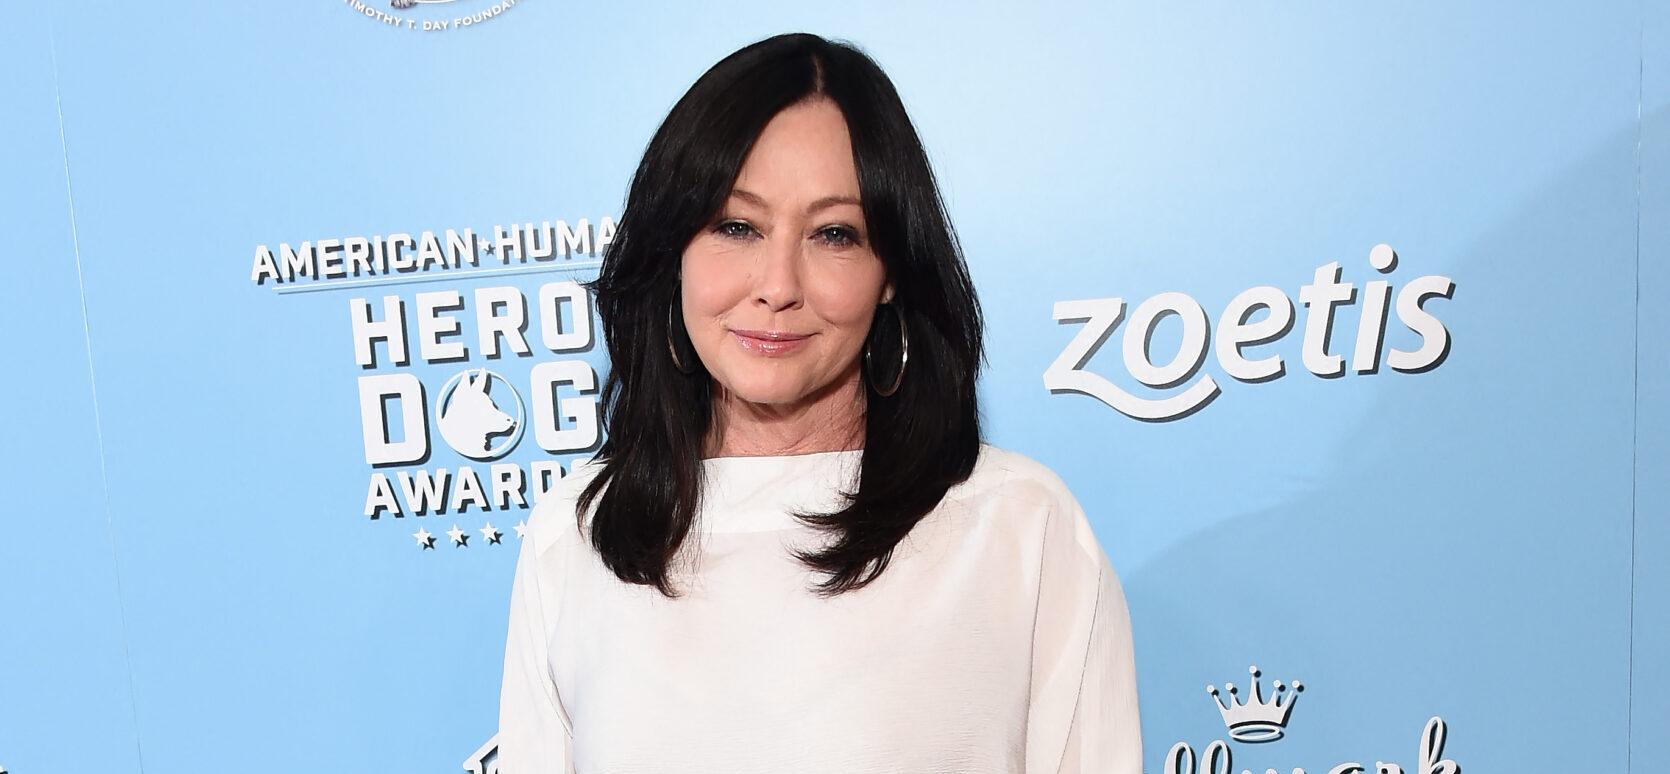 Shannen Doherty Recalls Having Brain Surgery With Knowledge Of Ex’s Cheating